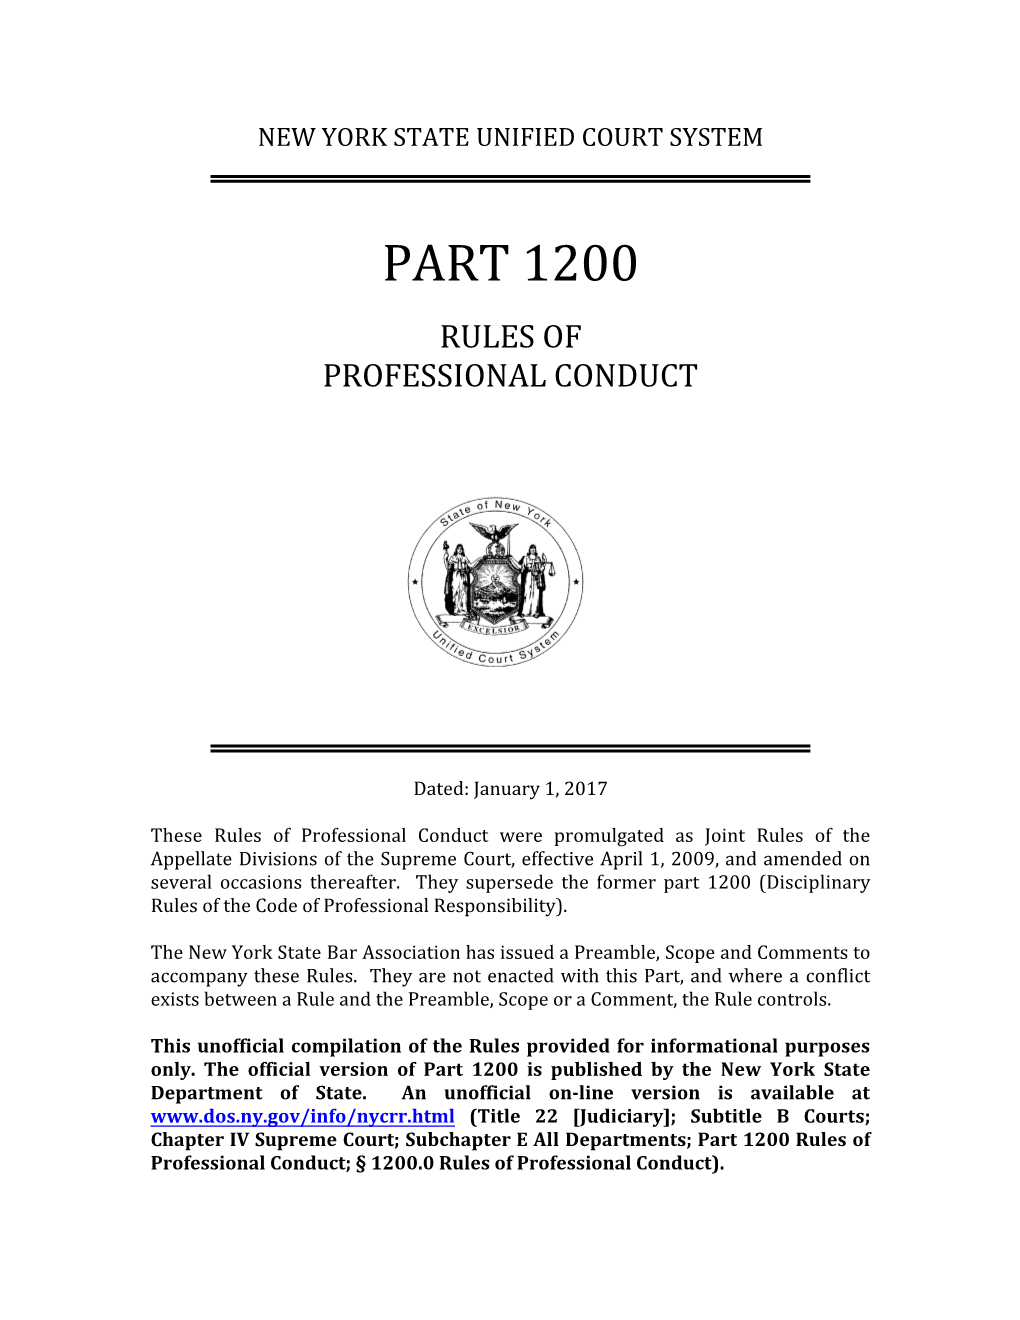 Part 1200 Rules of Professional Conduct